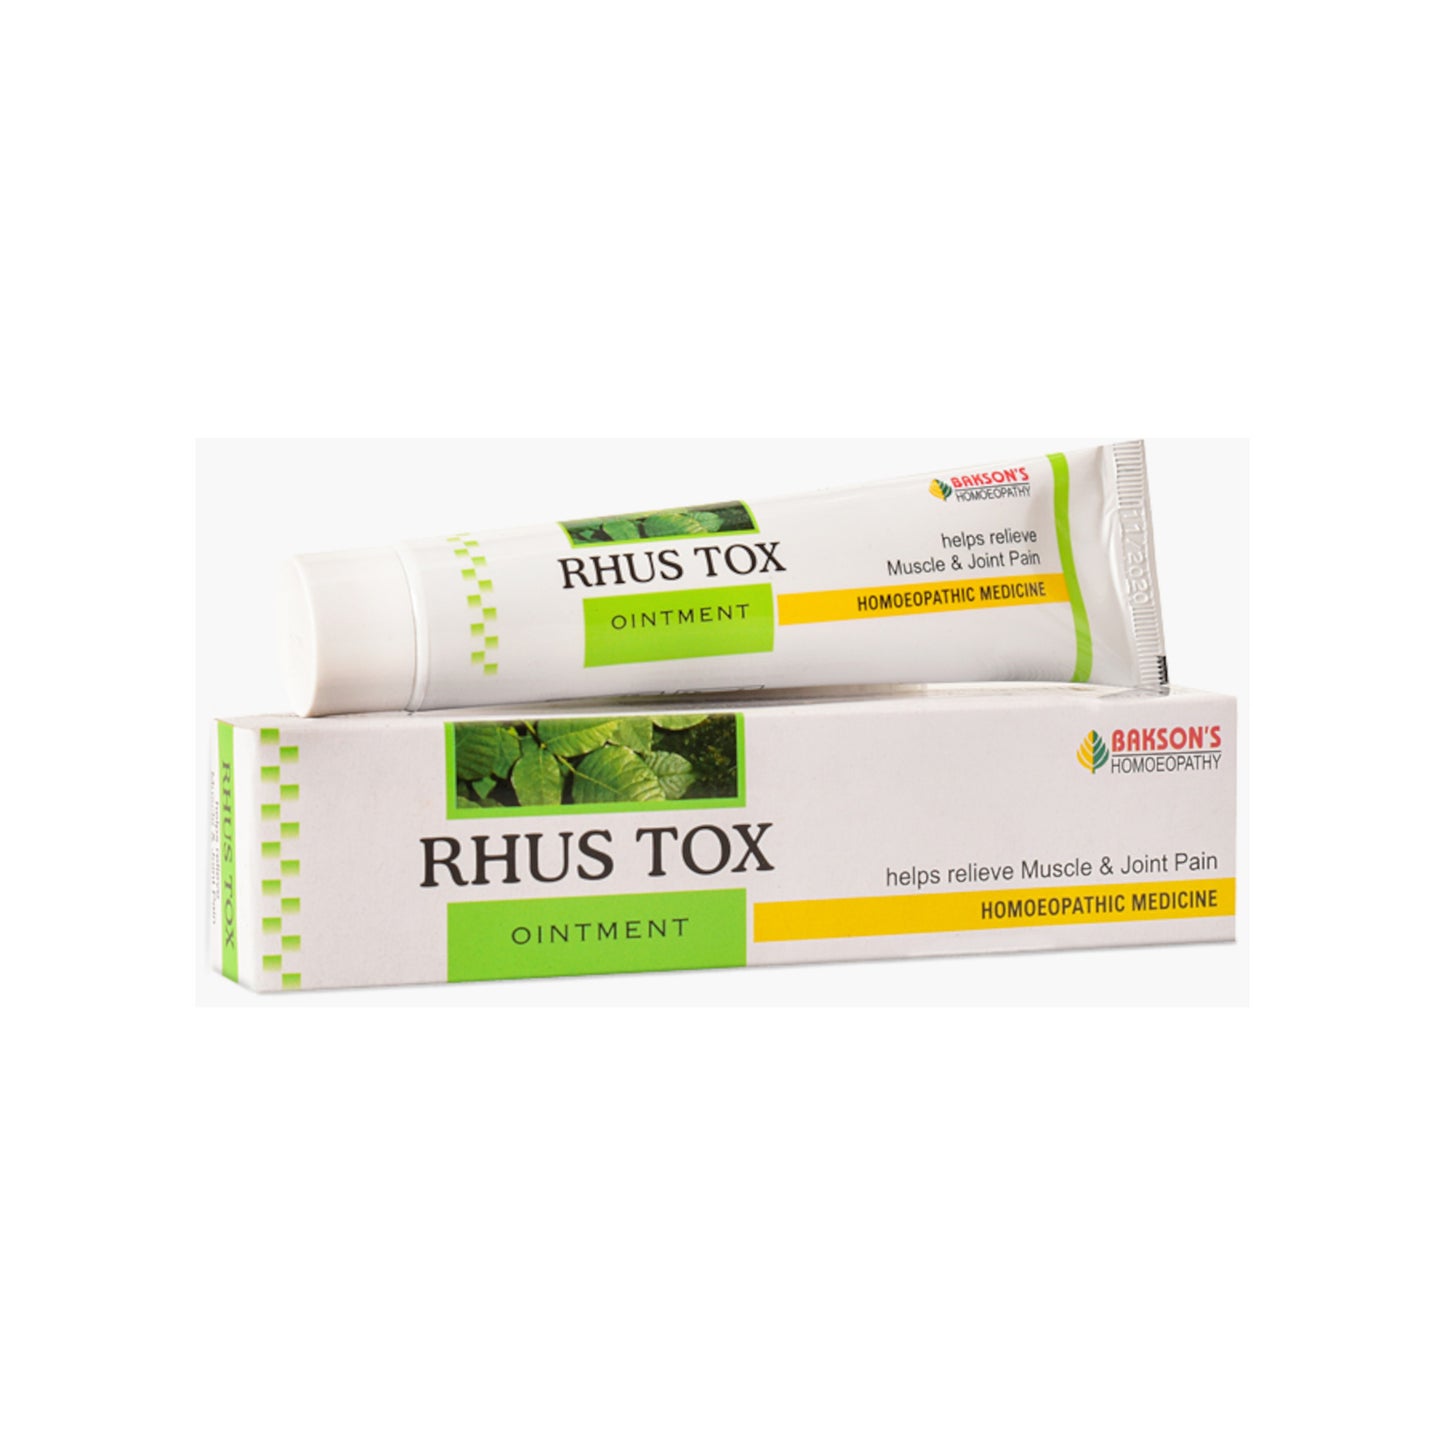 Image: Bakson's Rhus Tox Ointment 25 g: Relief for joint and muscle pain, stiffness, and rheumatism.